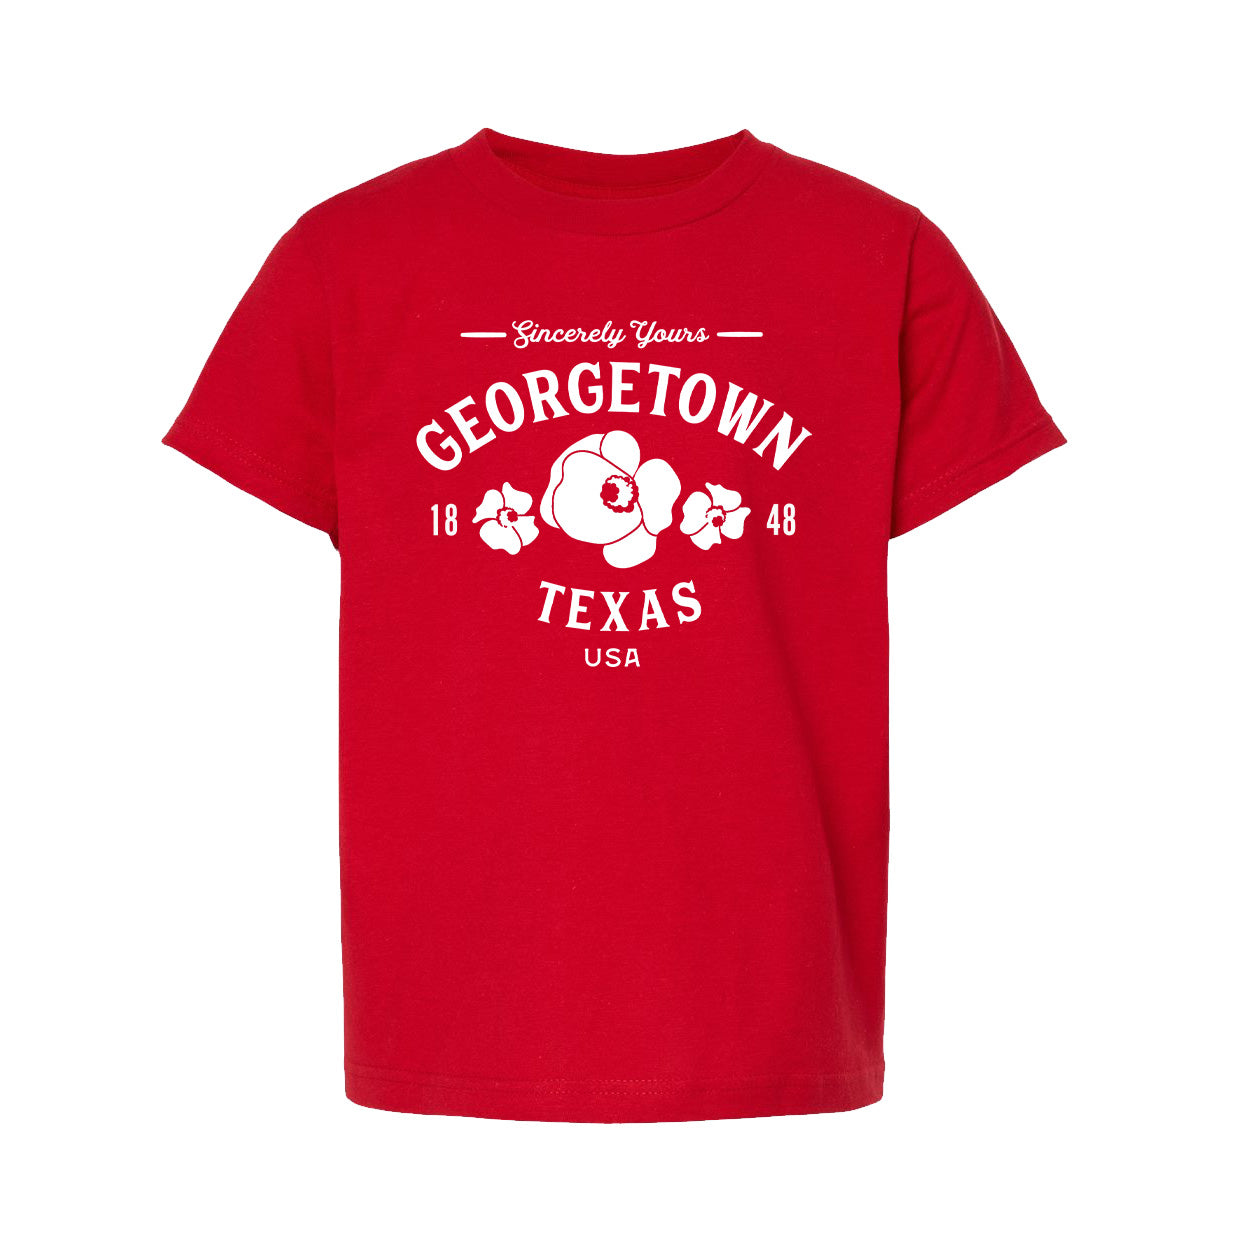 Georgetown Texas Youth T-shirt - Poppies